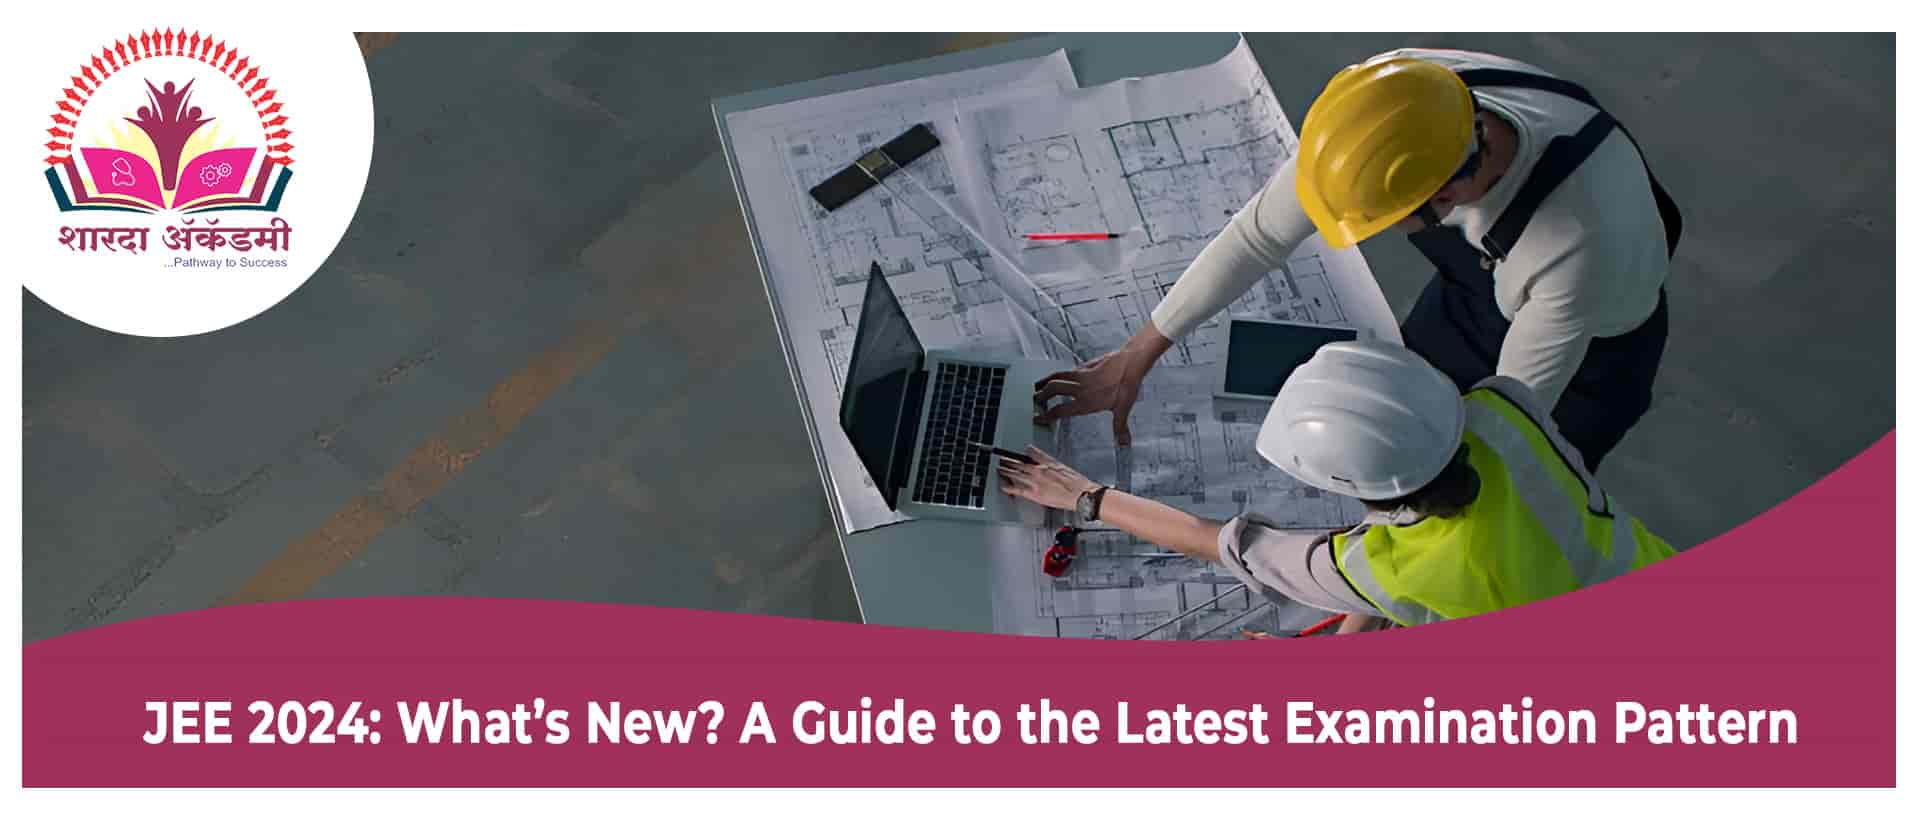 JEE 2024: Whats New? A Guide to the Latest Examination Pattern